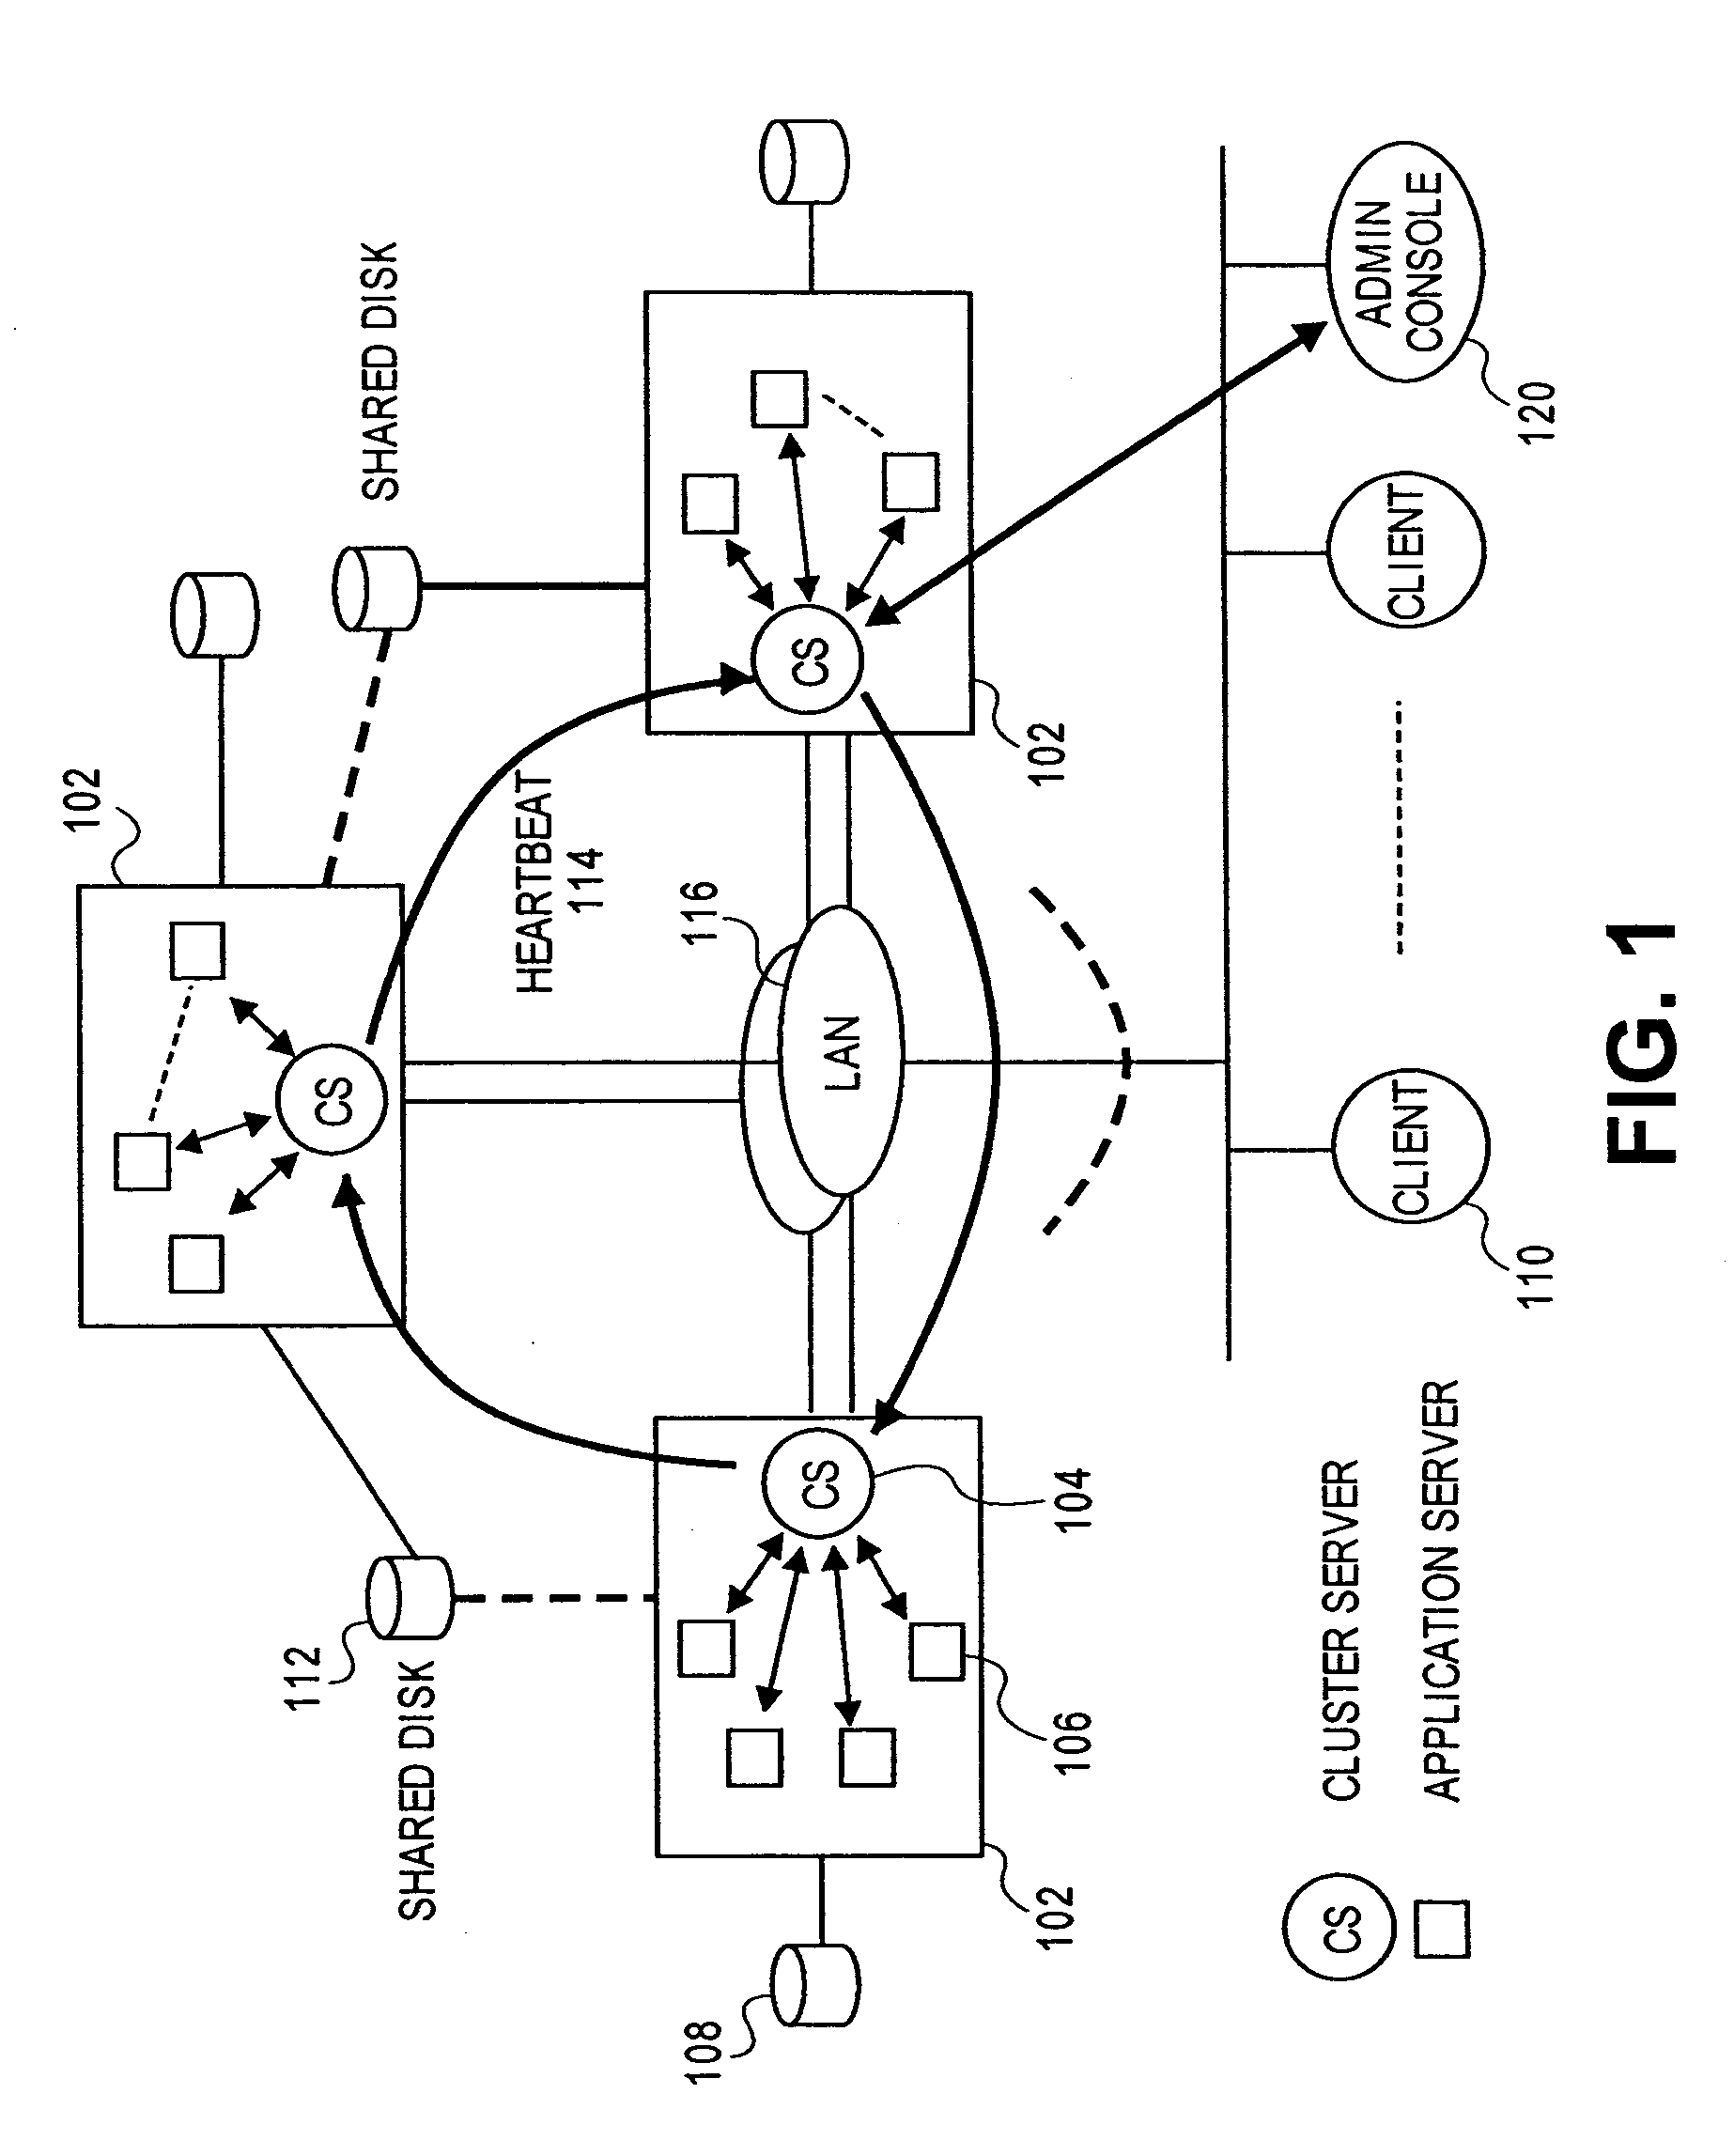 System and method for providing JAVA based high availability clustering framework